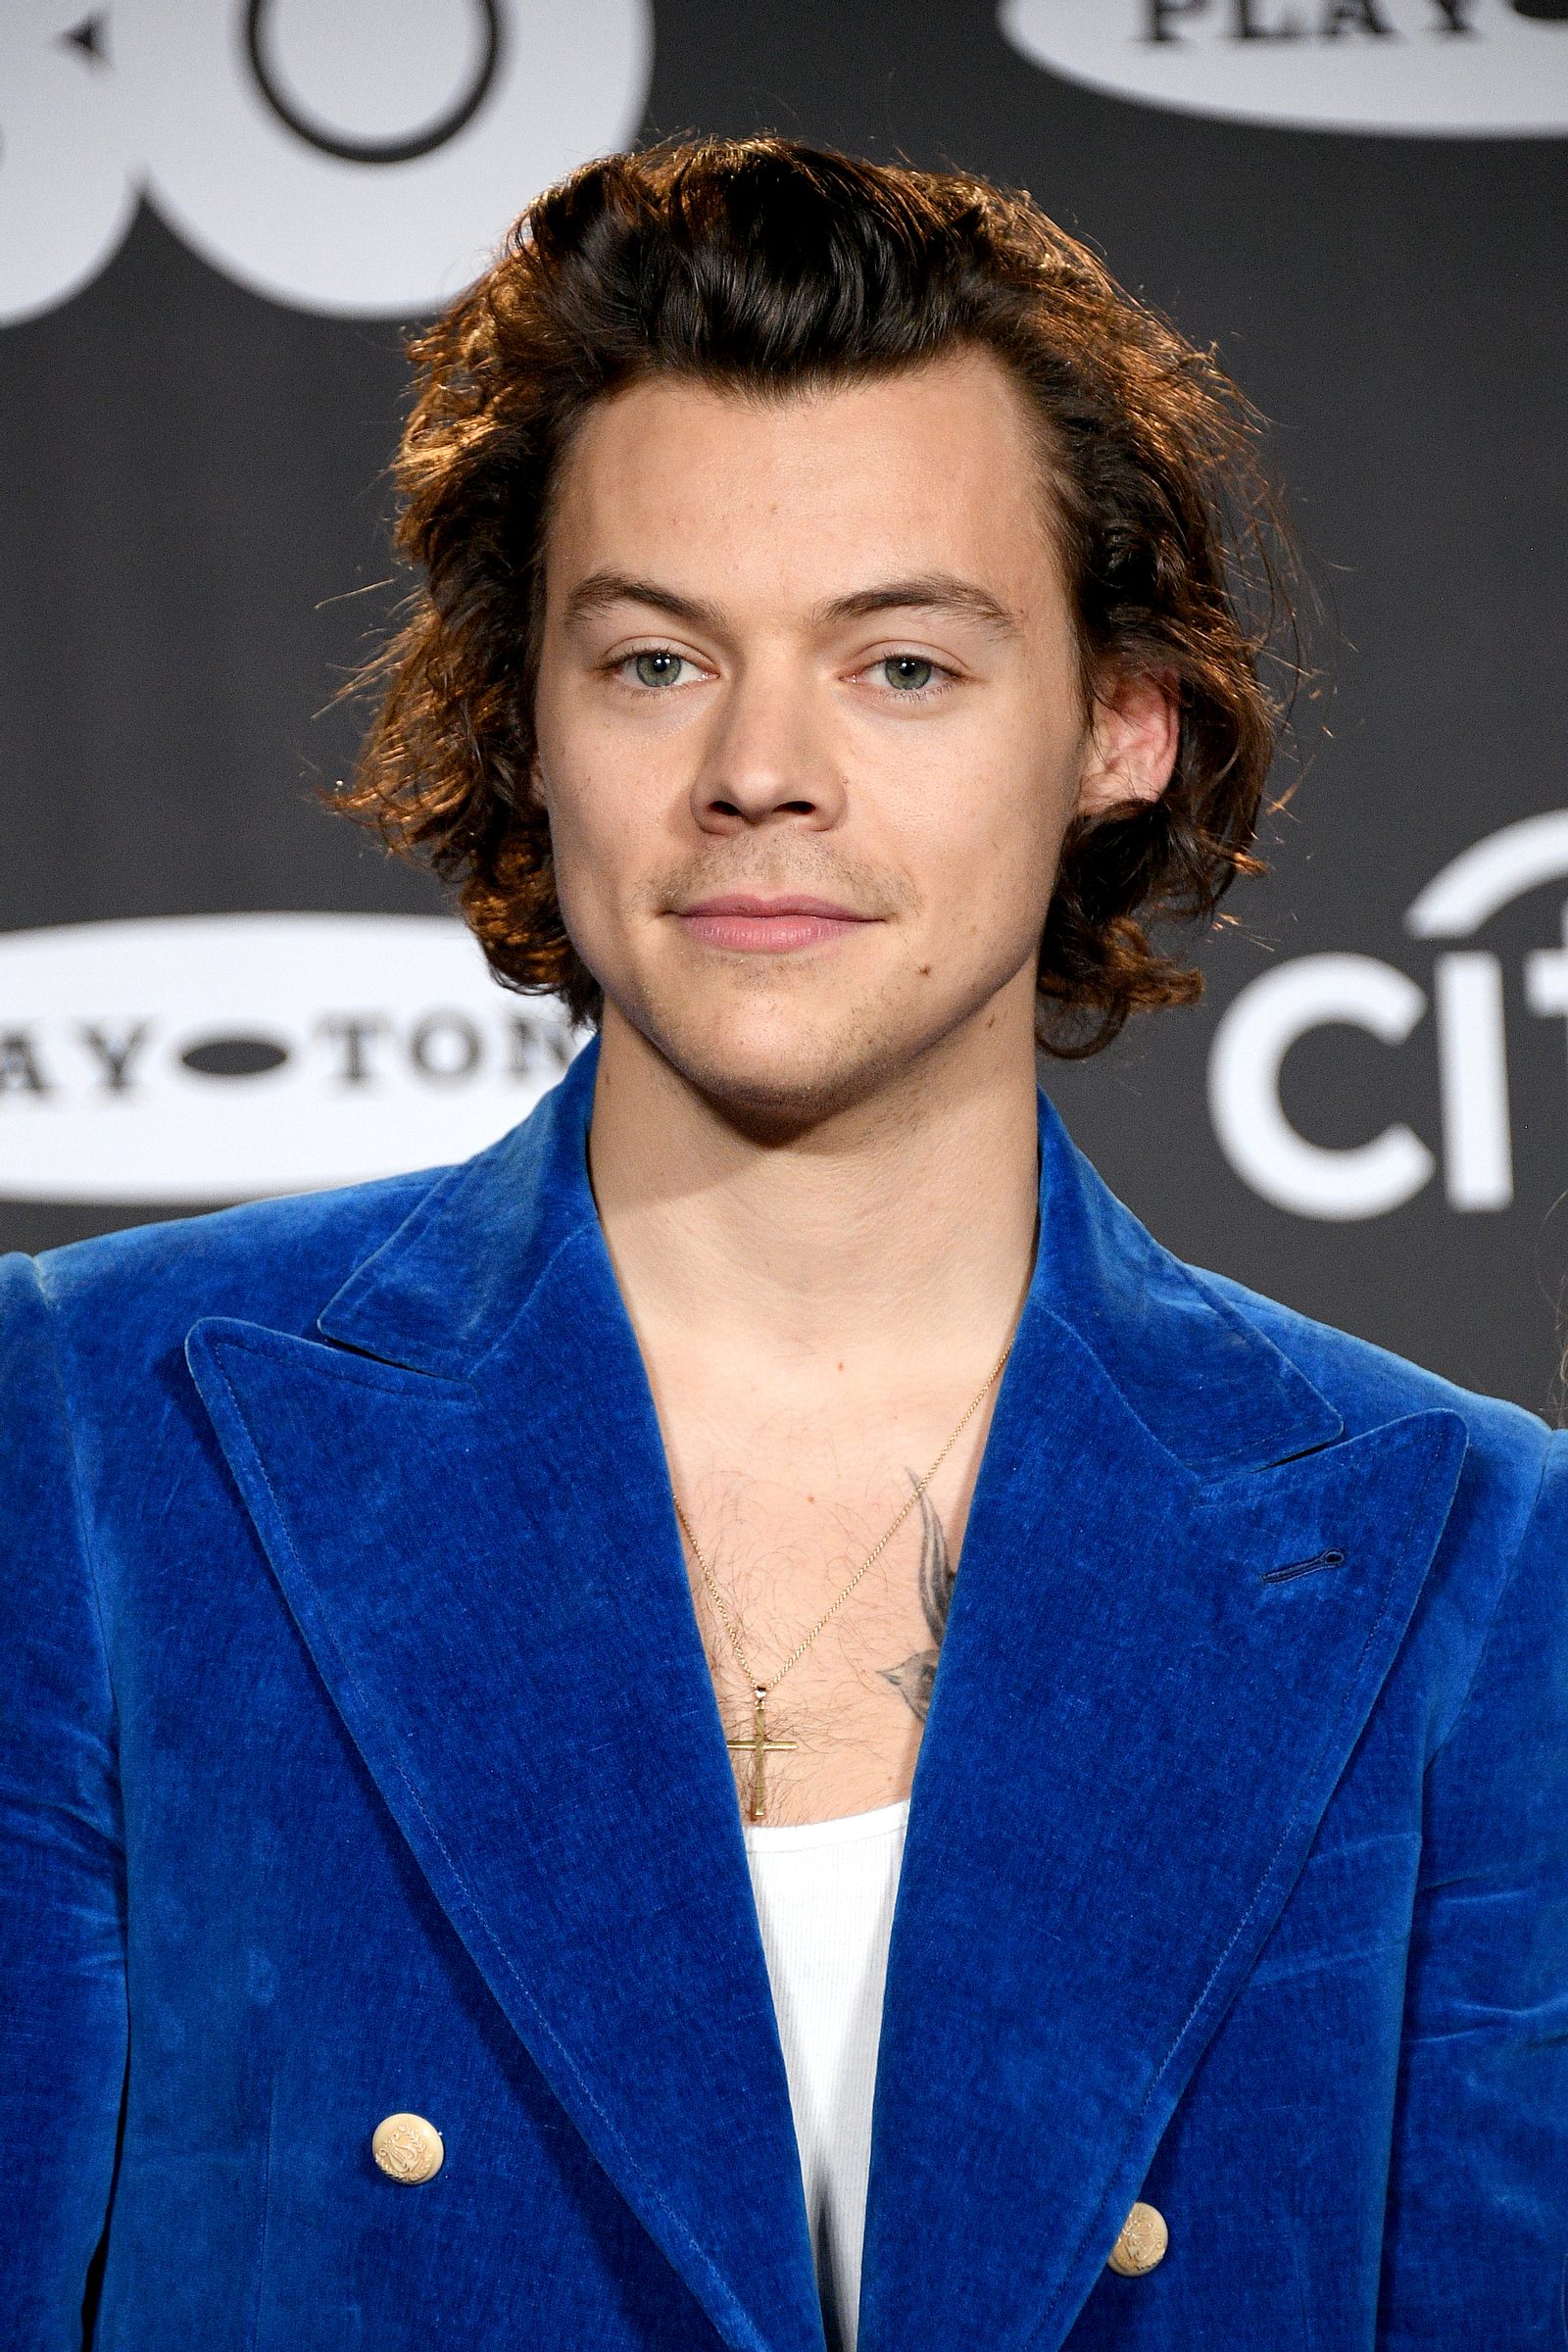 Harry Styles Agent Details | Harry Styles Management